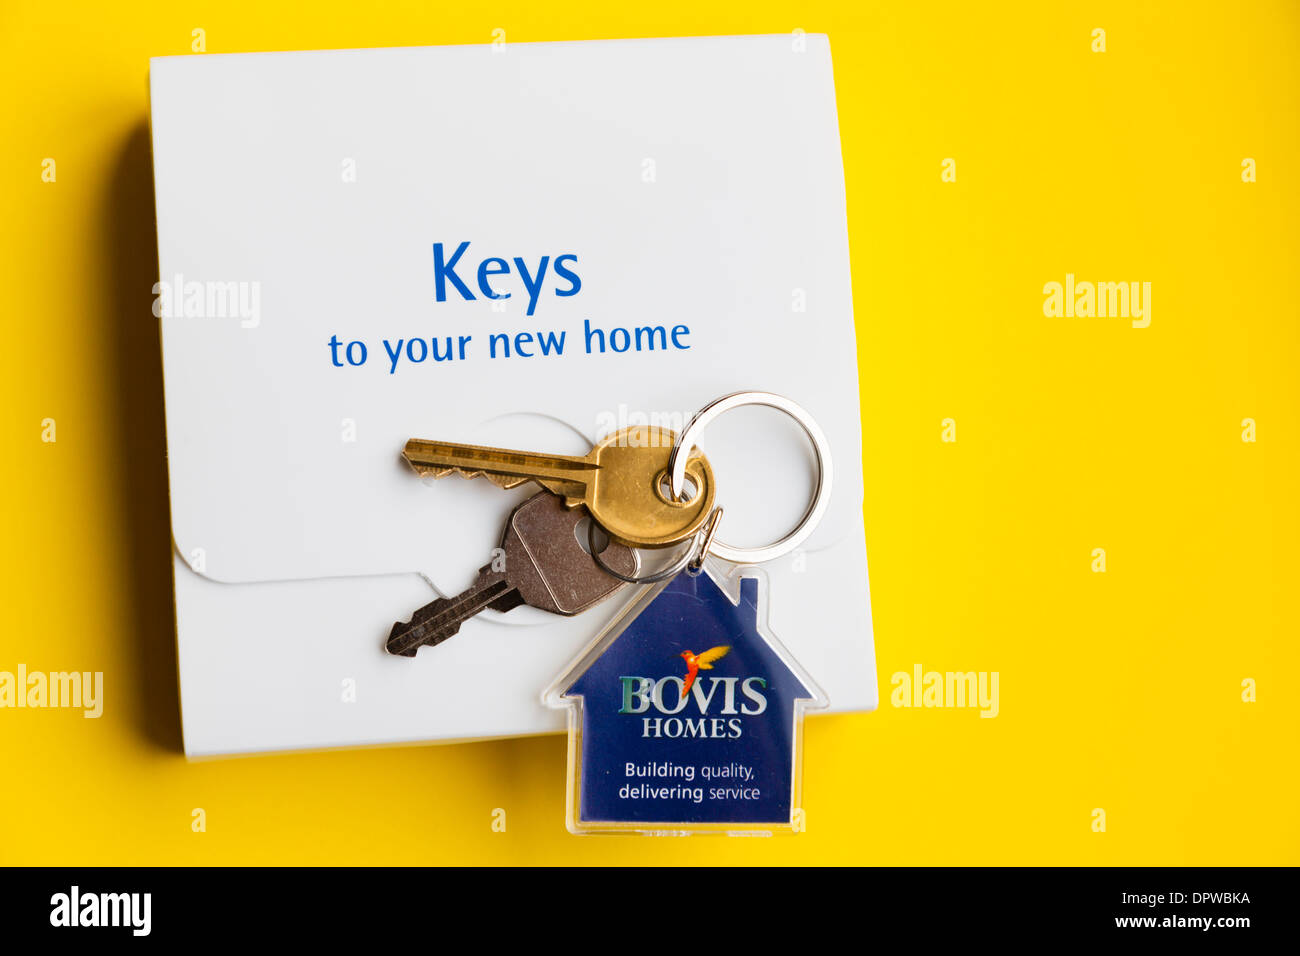 New house keys with box, Bovis Homes, on yellow background Stock Photo